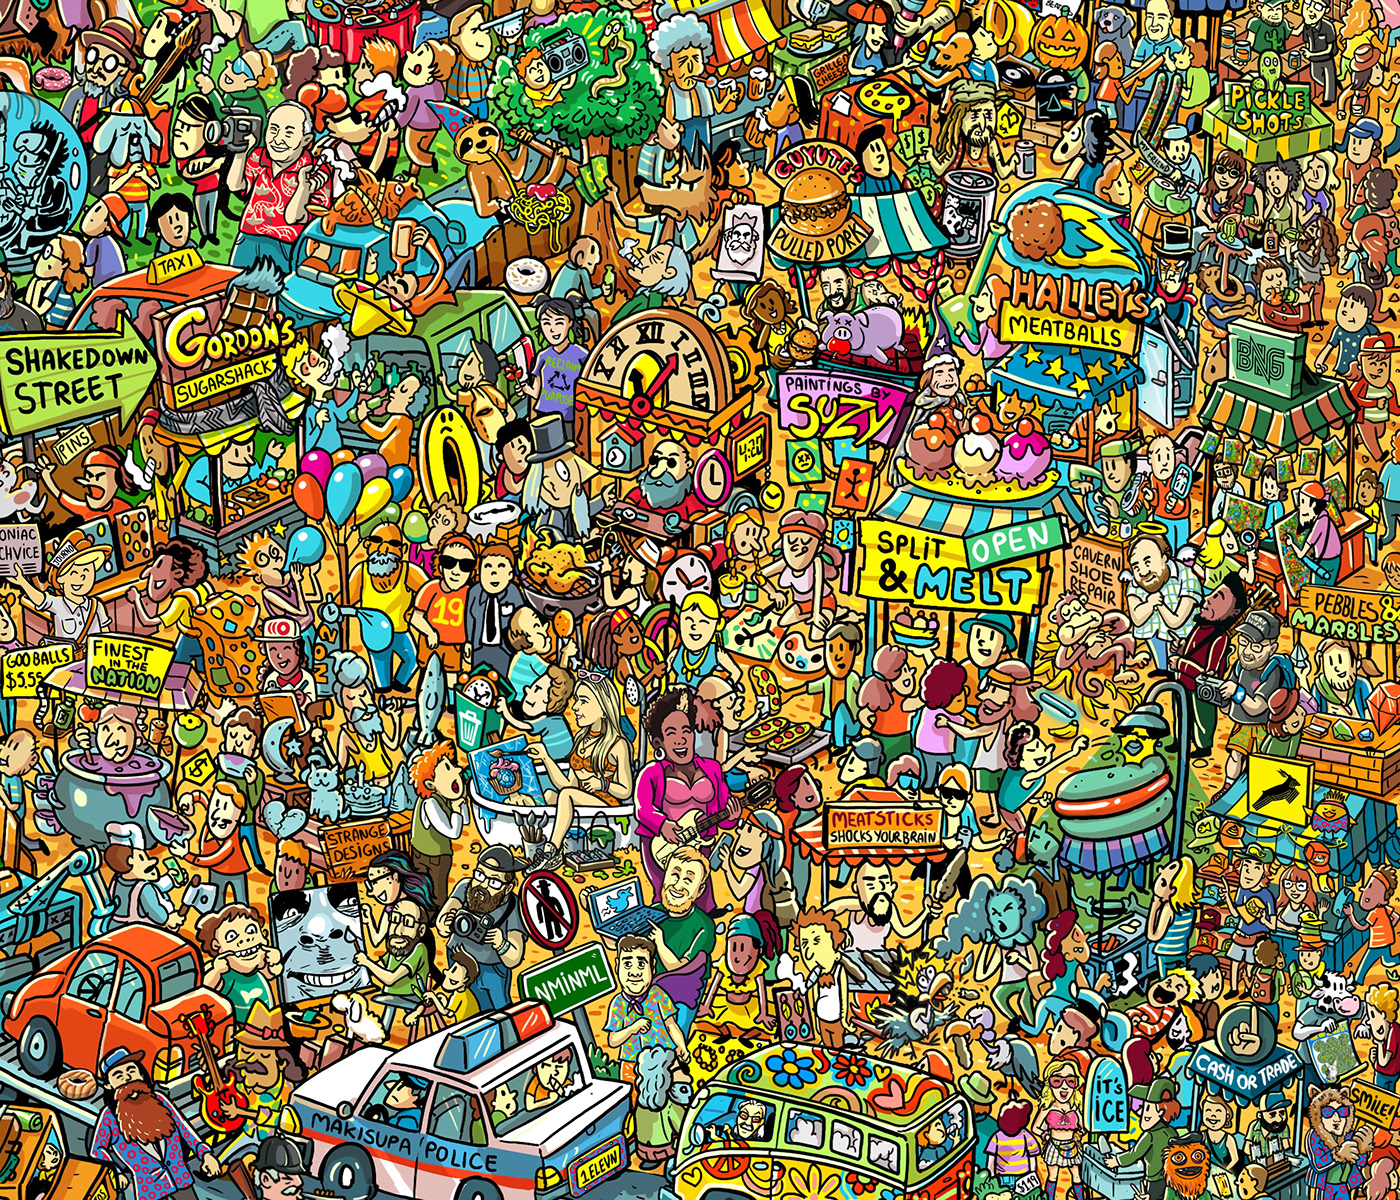 Poster Design posters concert rock detail music Phish search and find seek and find Where Is Wally